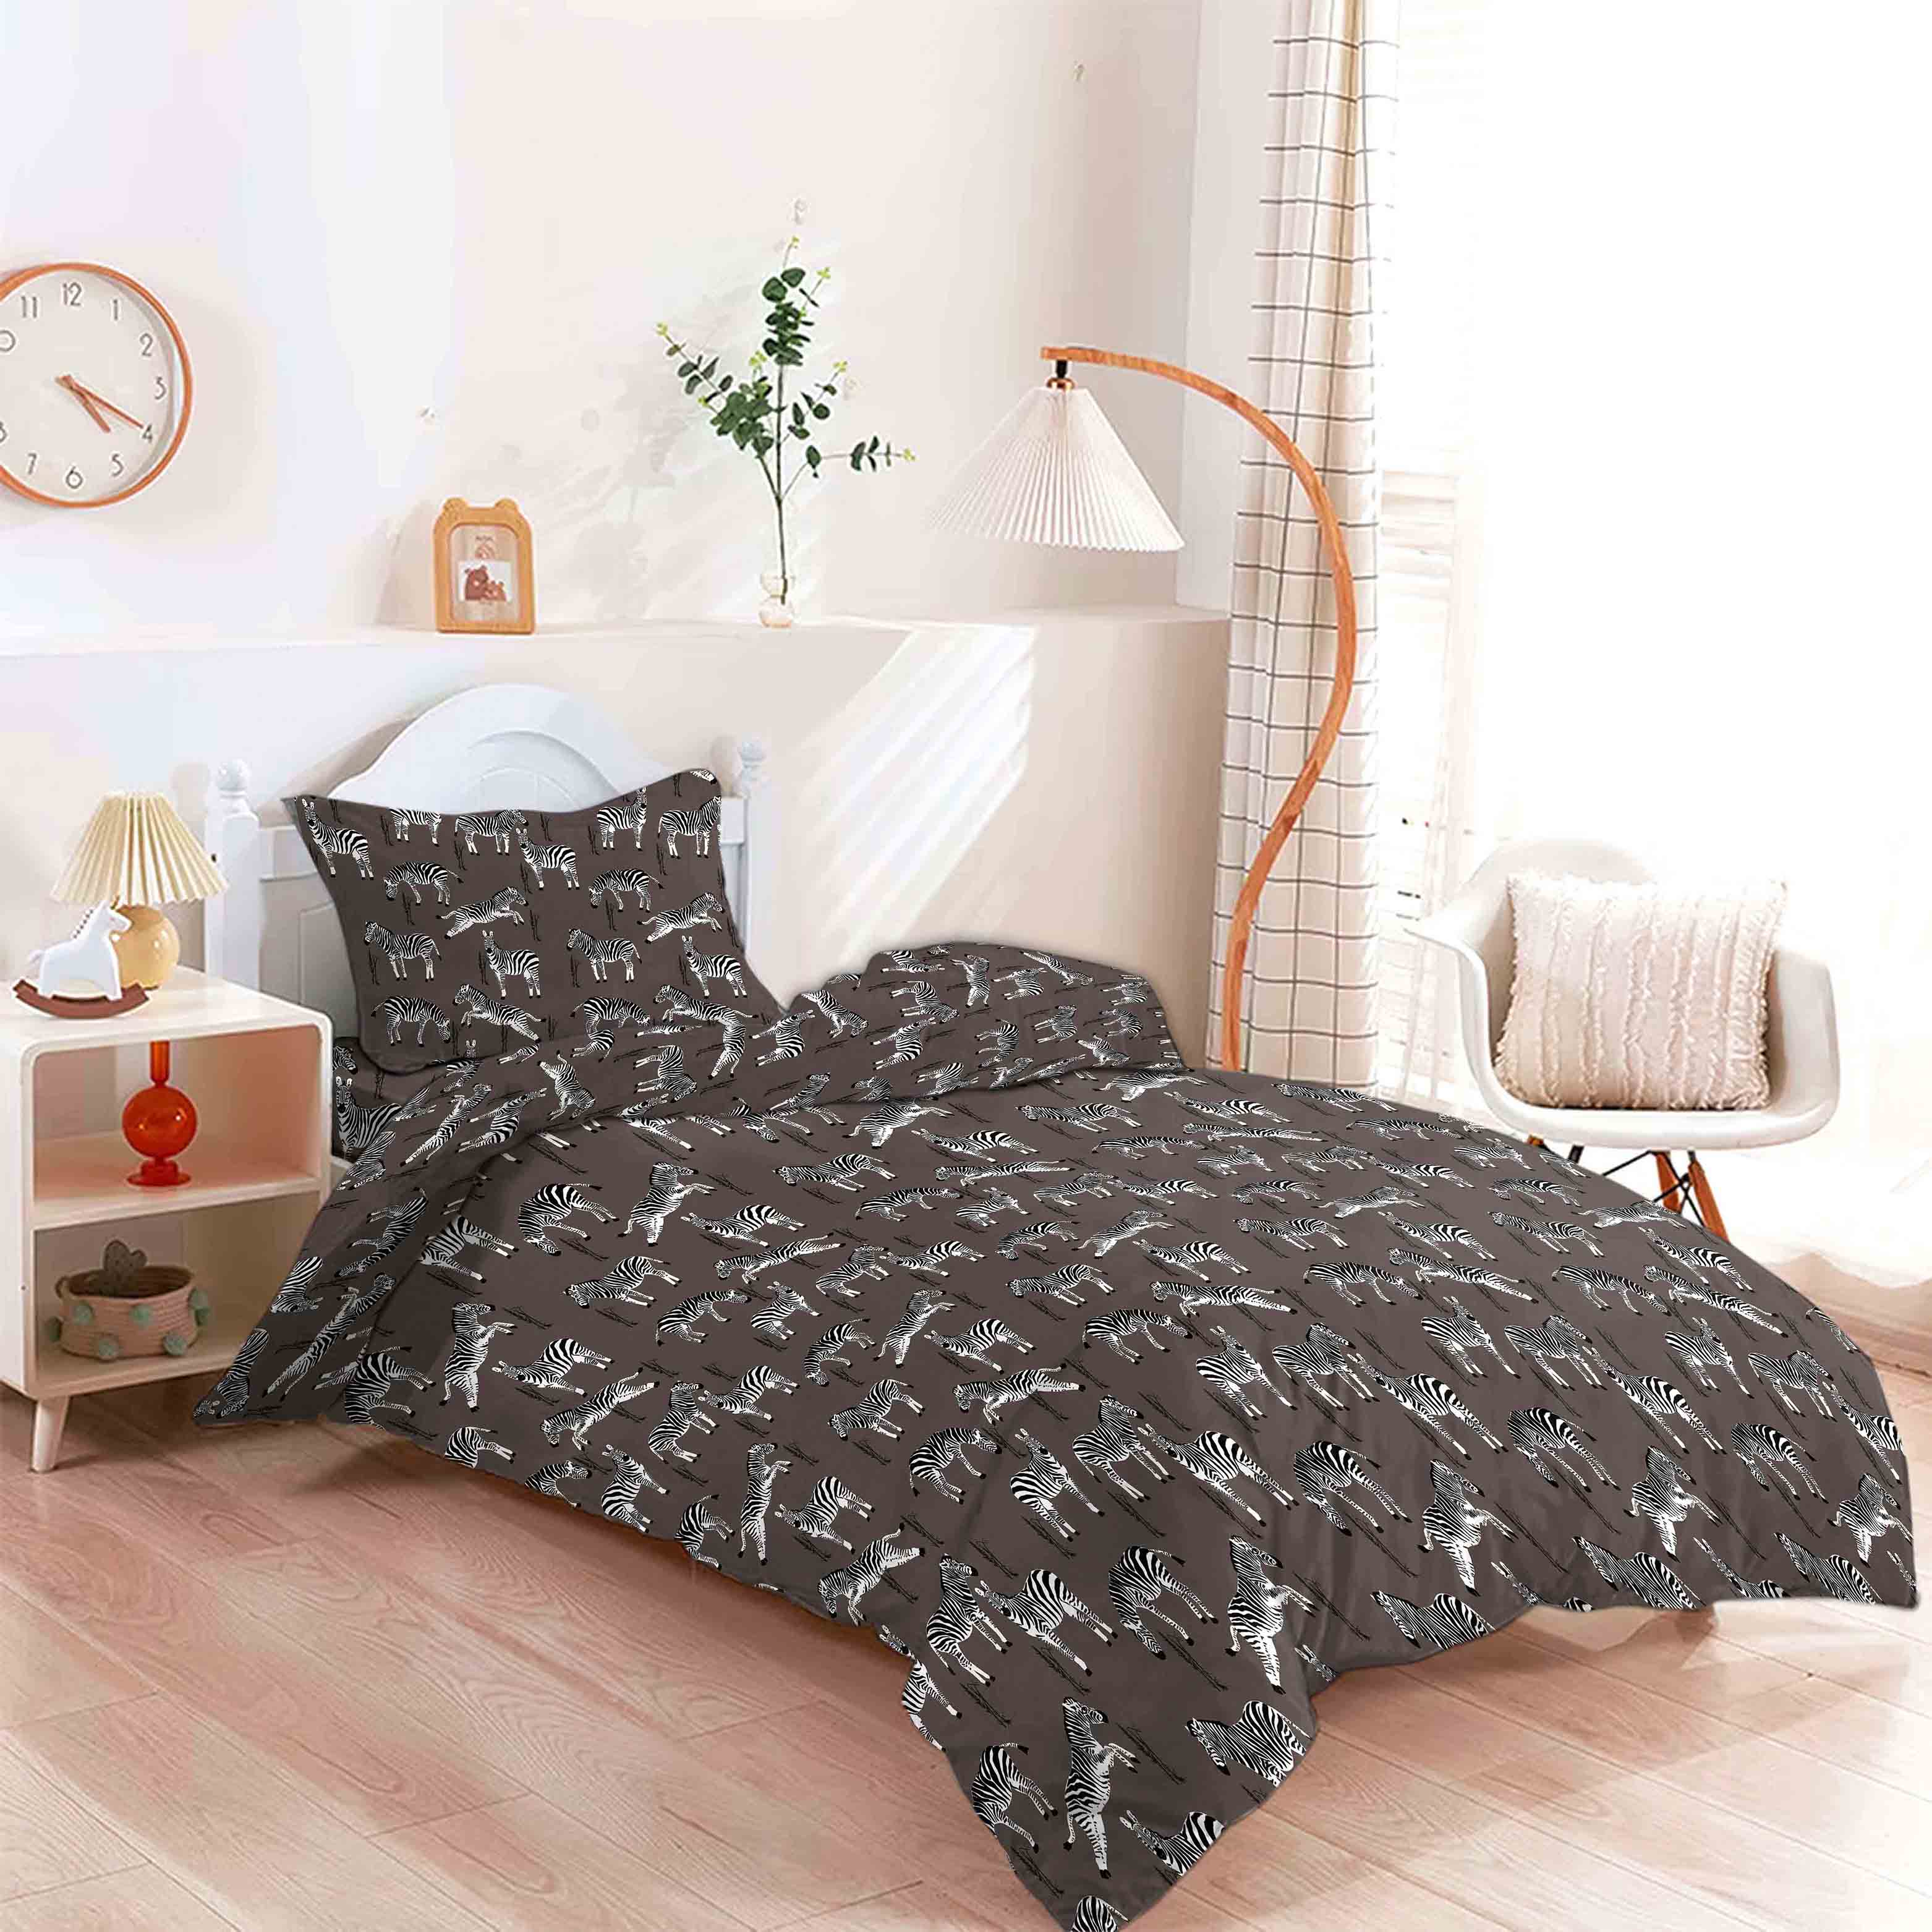 Zebra Black Cow Bedcover for Single Bed with Pillow Covers King Size (60" X 90")